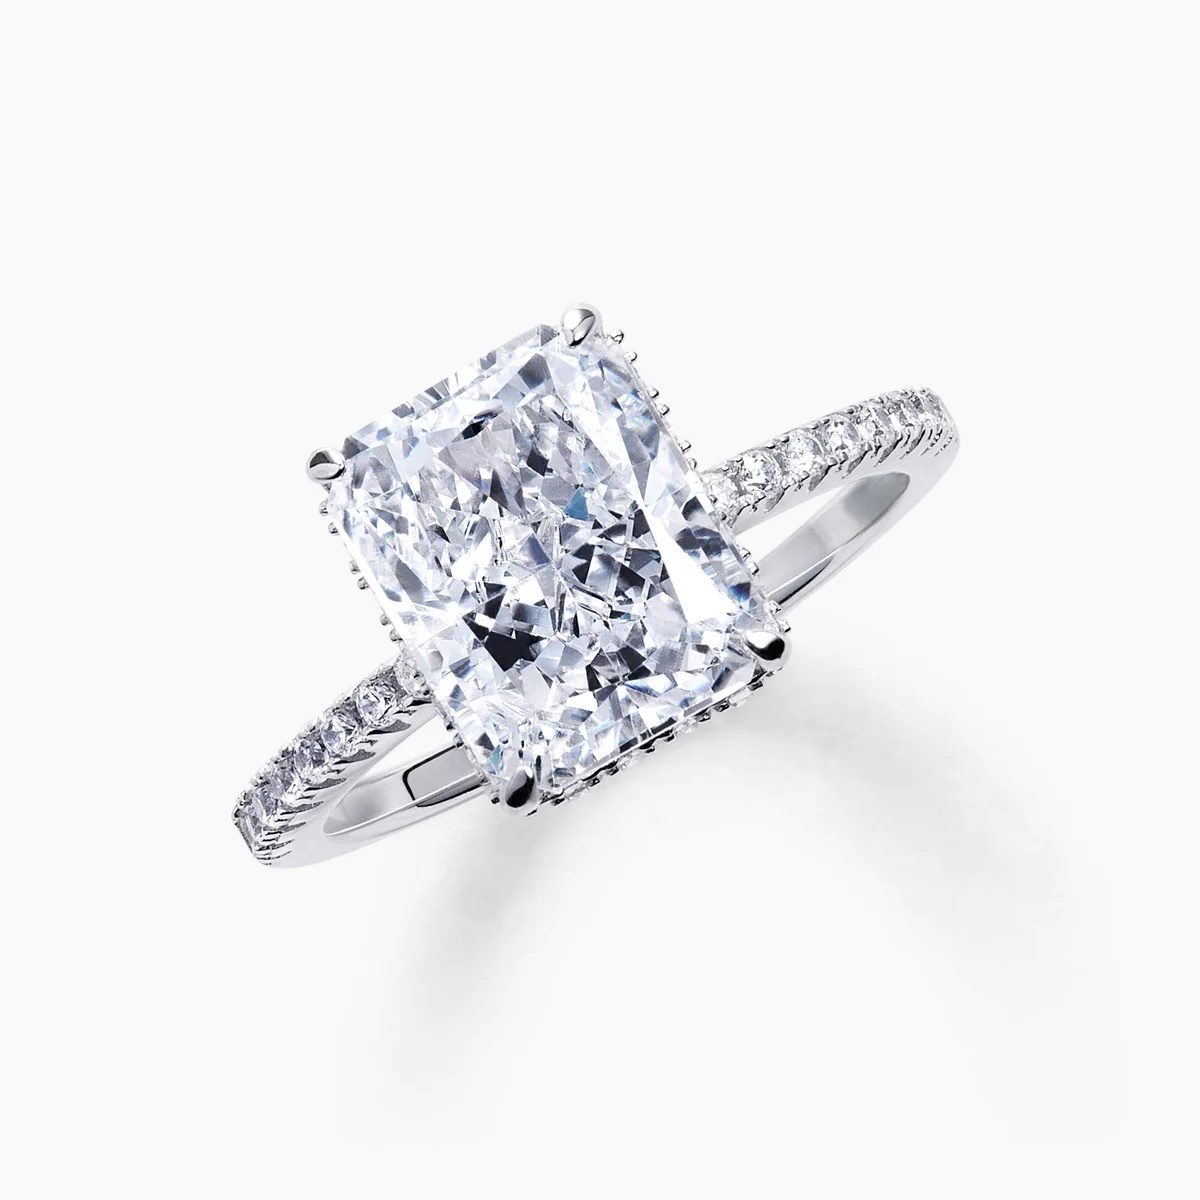 Crushed Ice 1.69 CT Radiant Colorless Moissanite Solitaire Ring